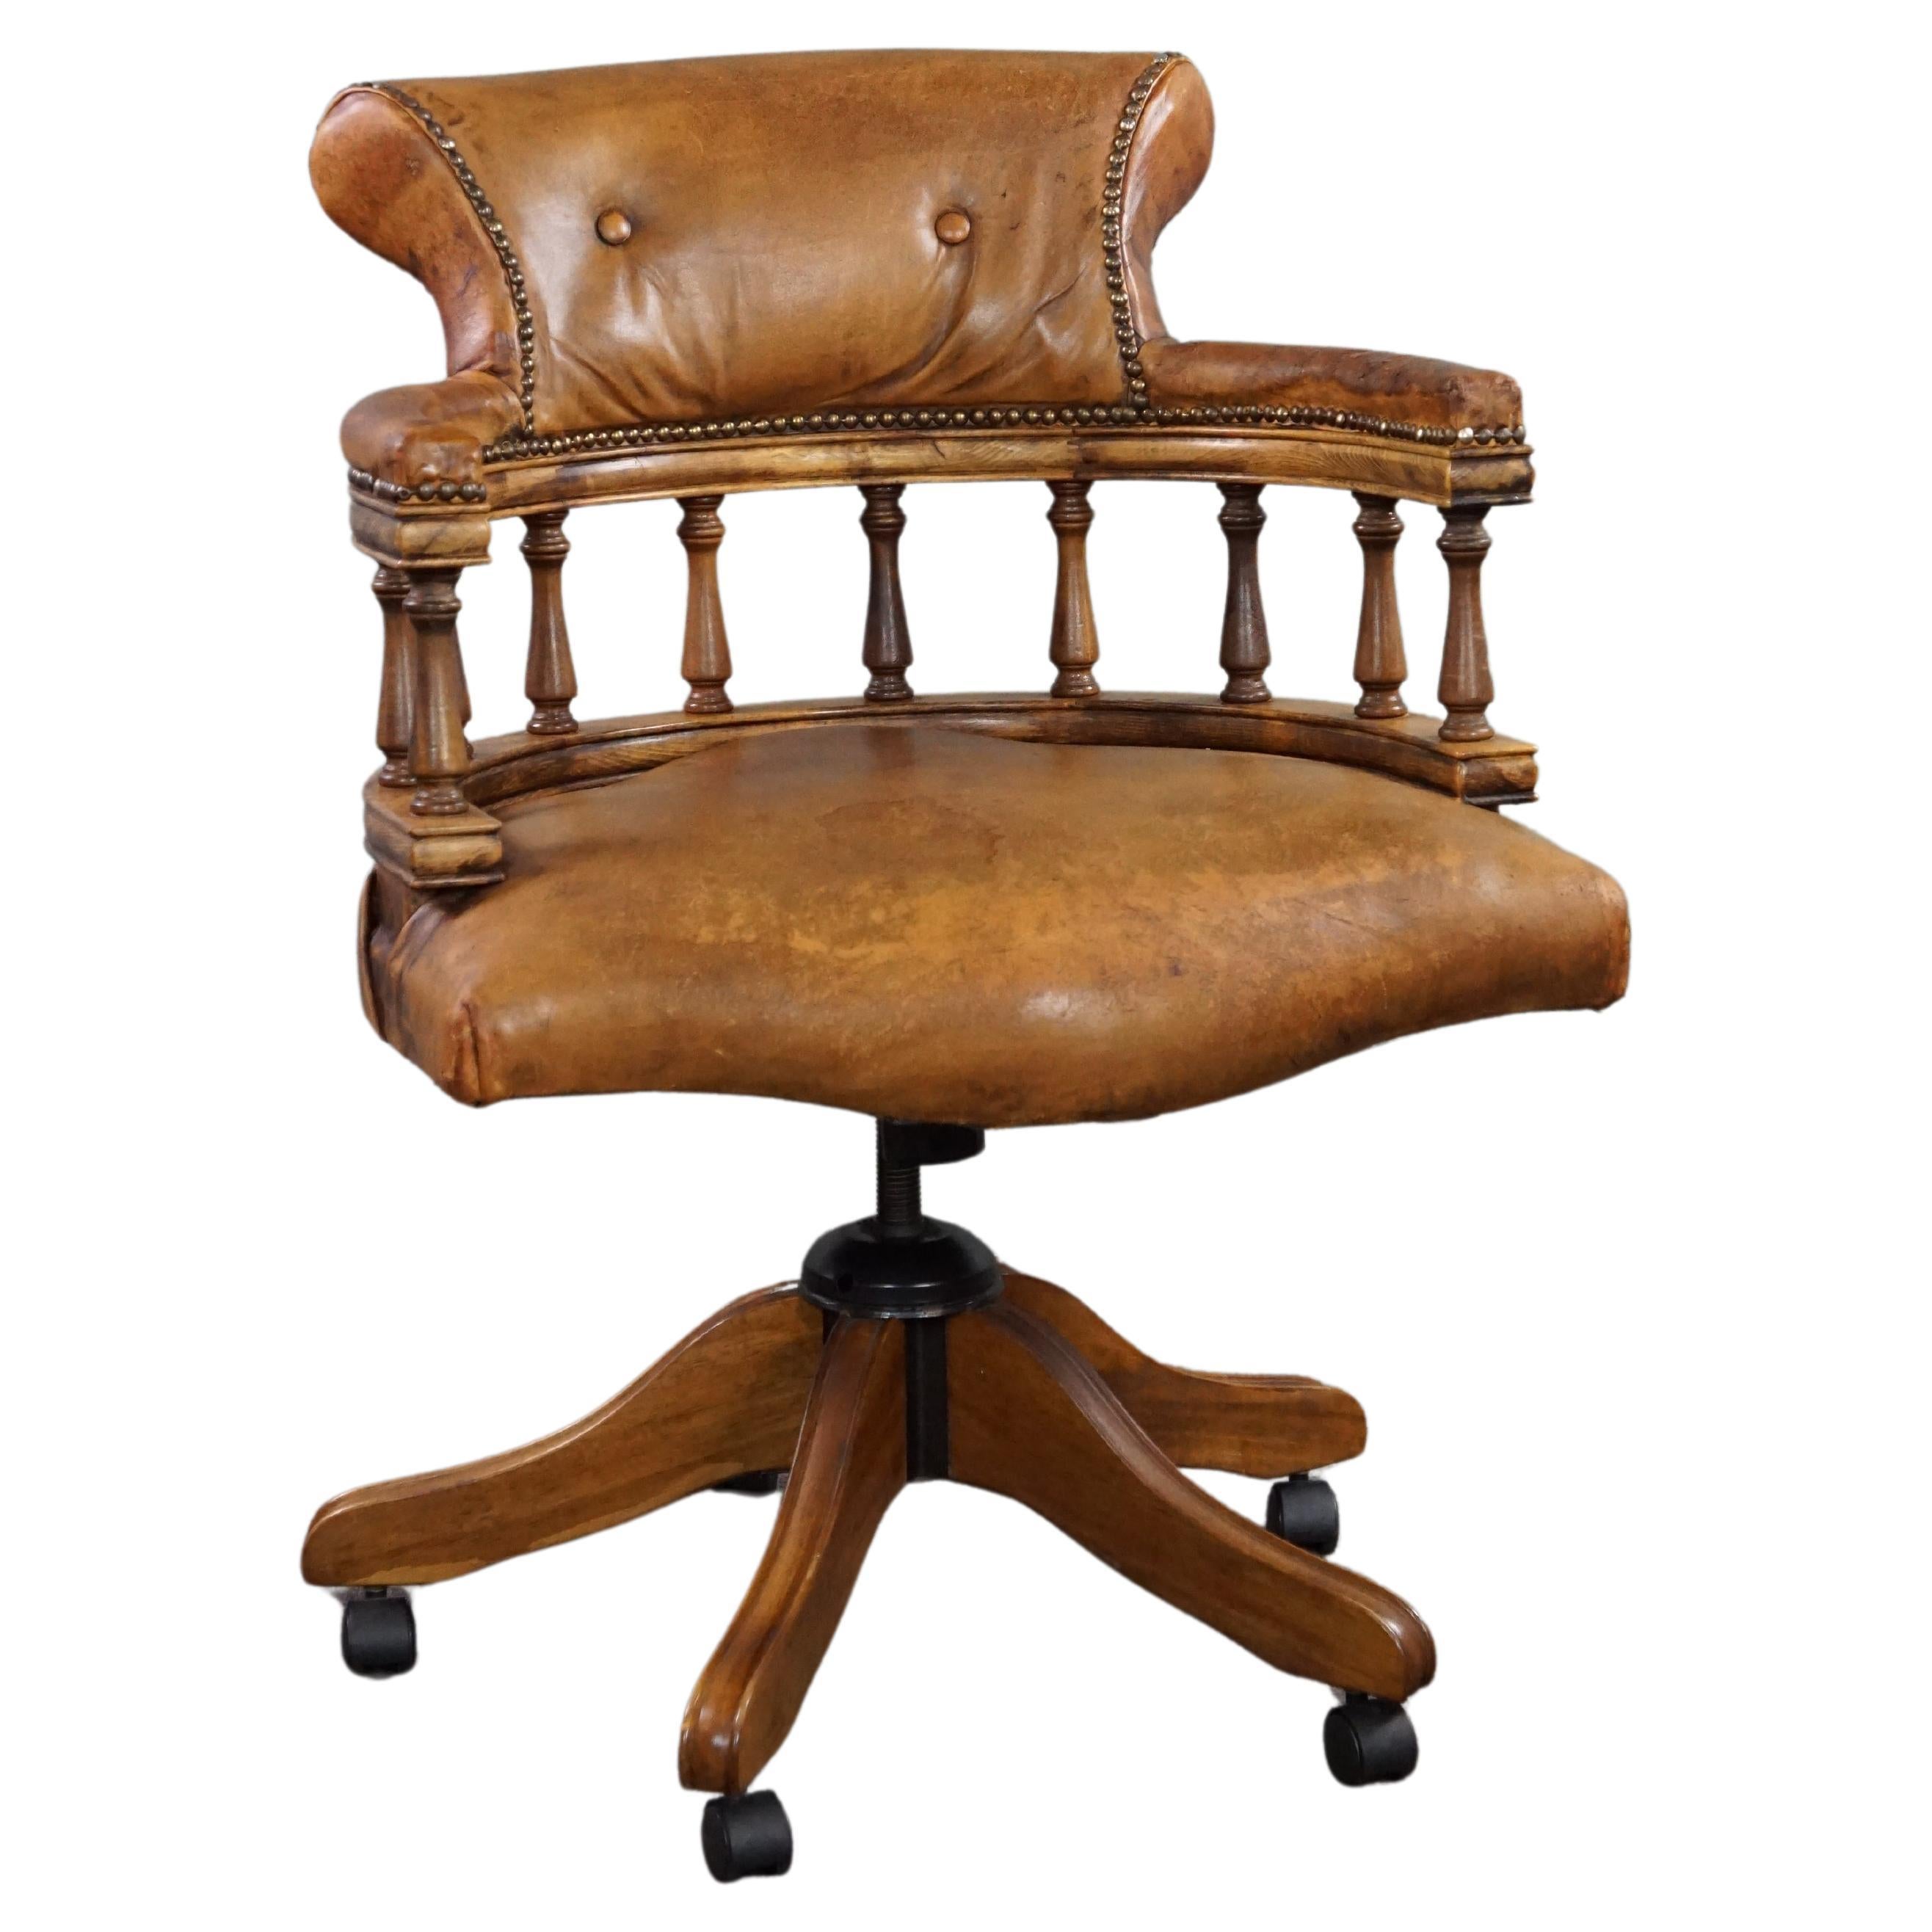 Sheep leather Captains Chair / office chair For Sale